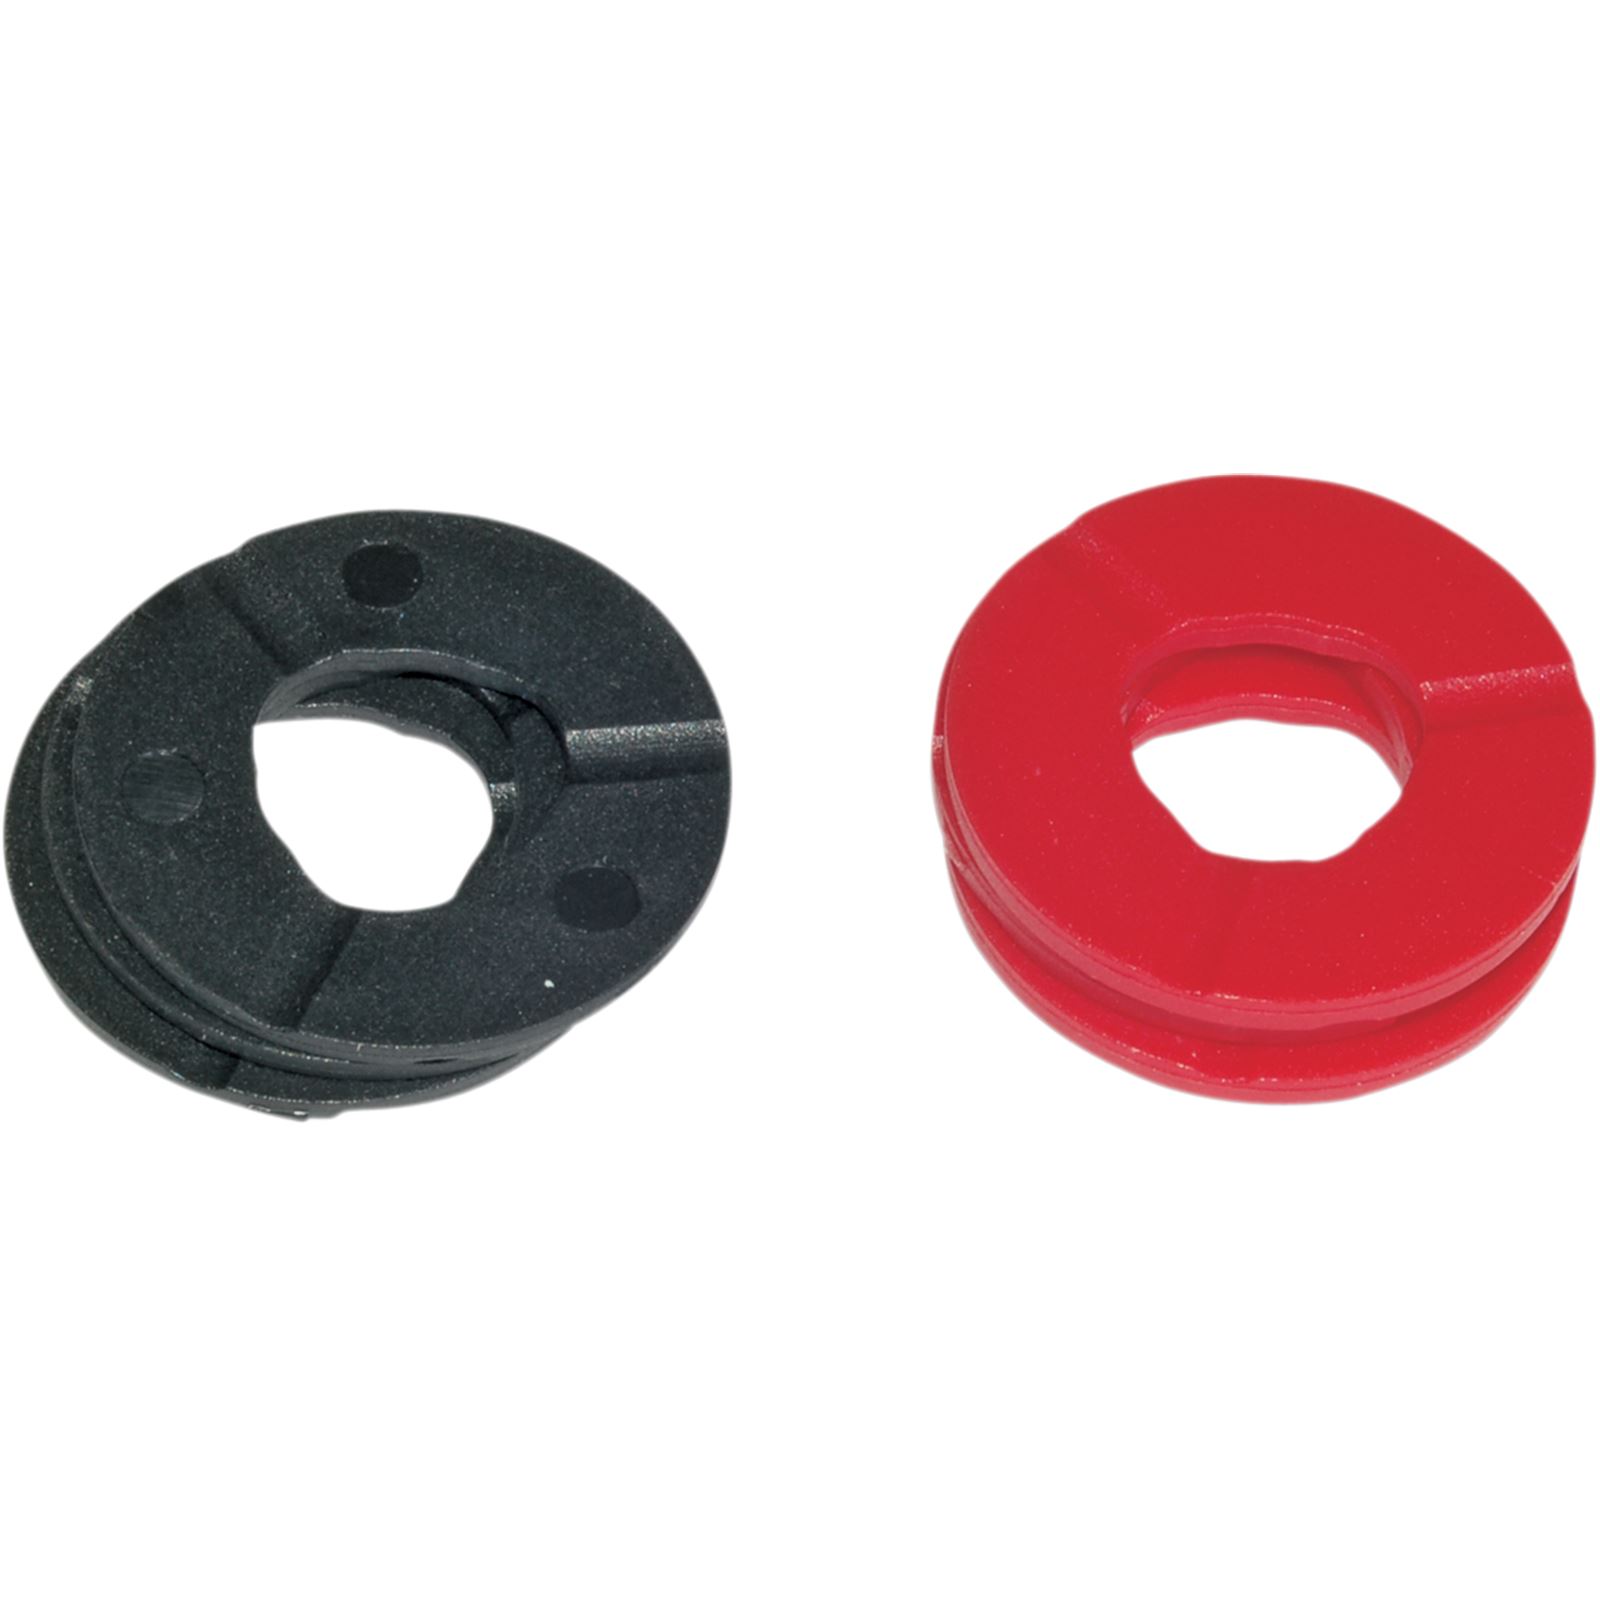 Race Tech Shock Lowering Spacer for 16 mm Shock